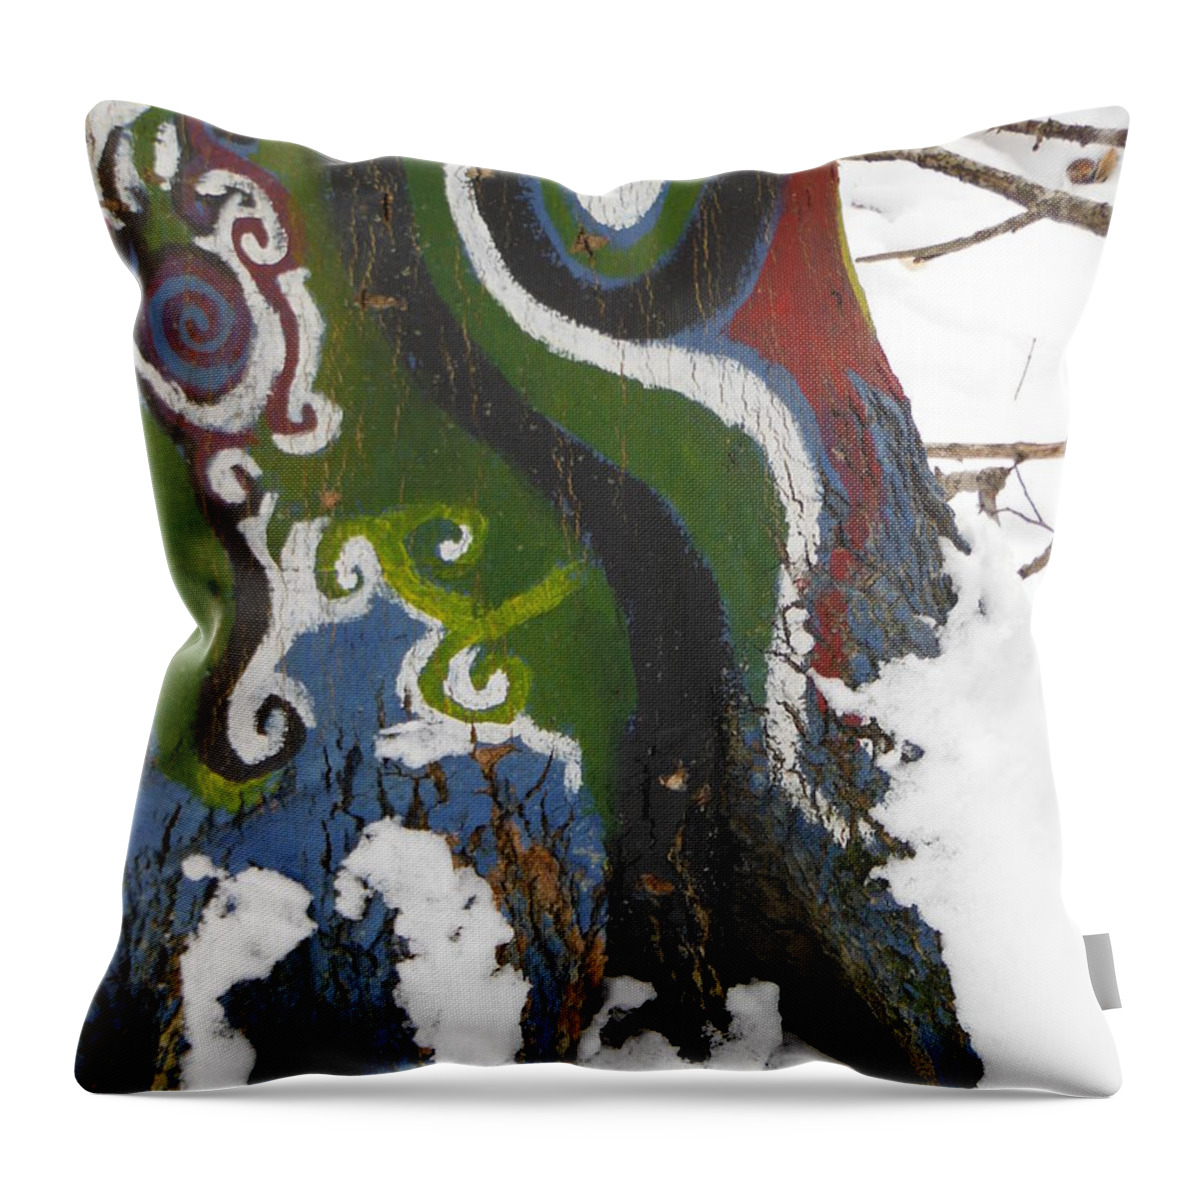 Graffiti Throw Pillow featuring the photograph GraffiTree 3 by Paddy Shaffer